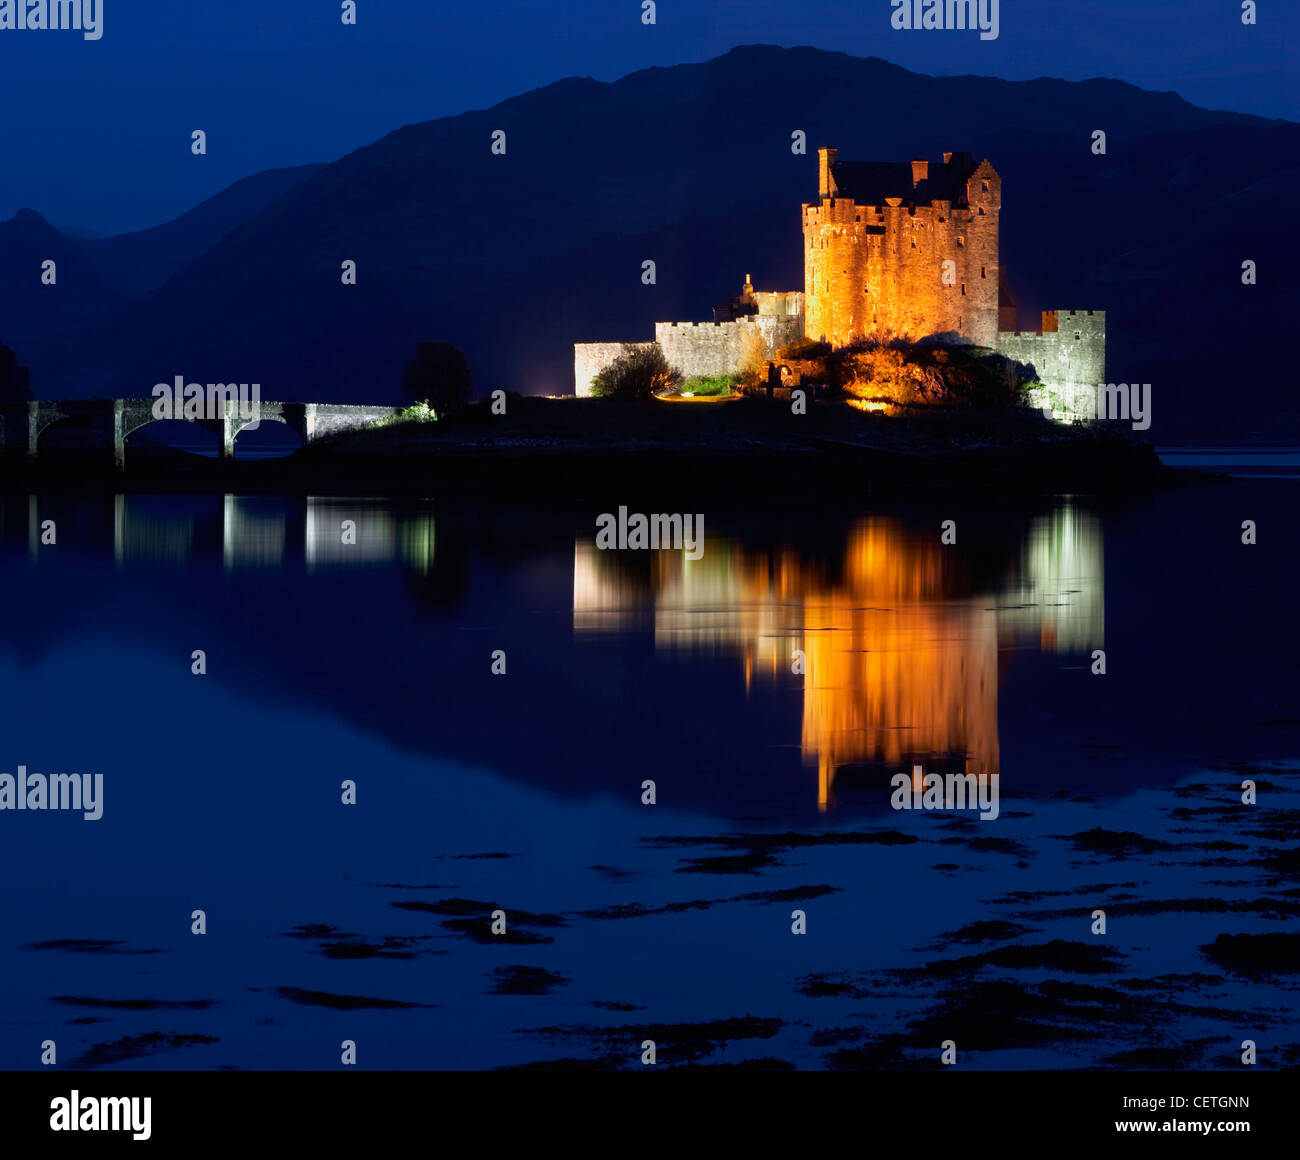 Eilean Donan Castle at night. Although the island of Eilean Donan has been a fortified site for at least 800 years, the castle w Stock Photo